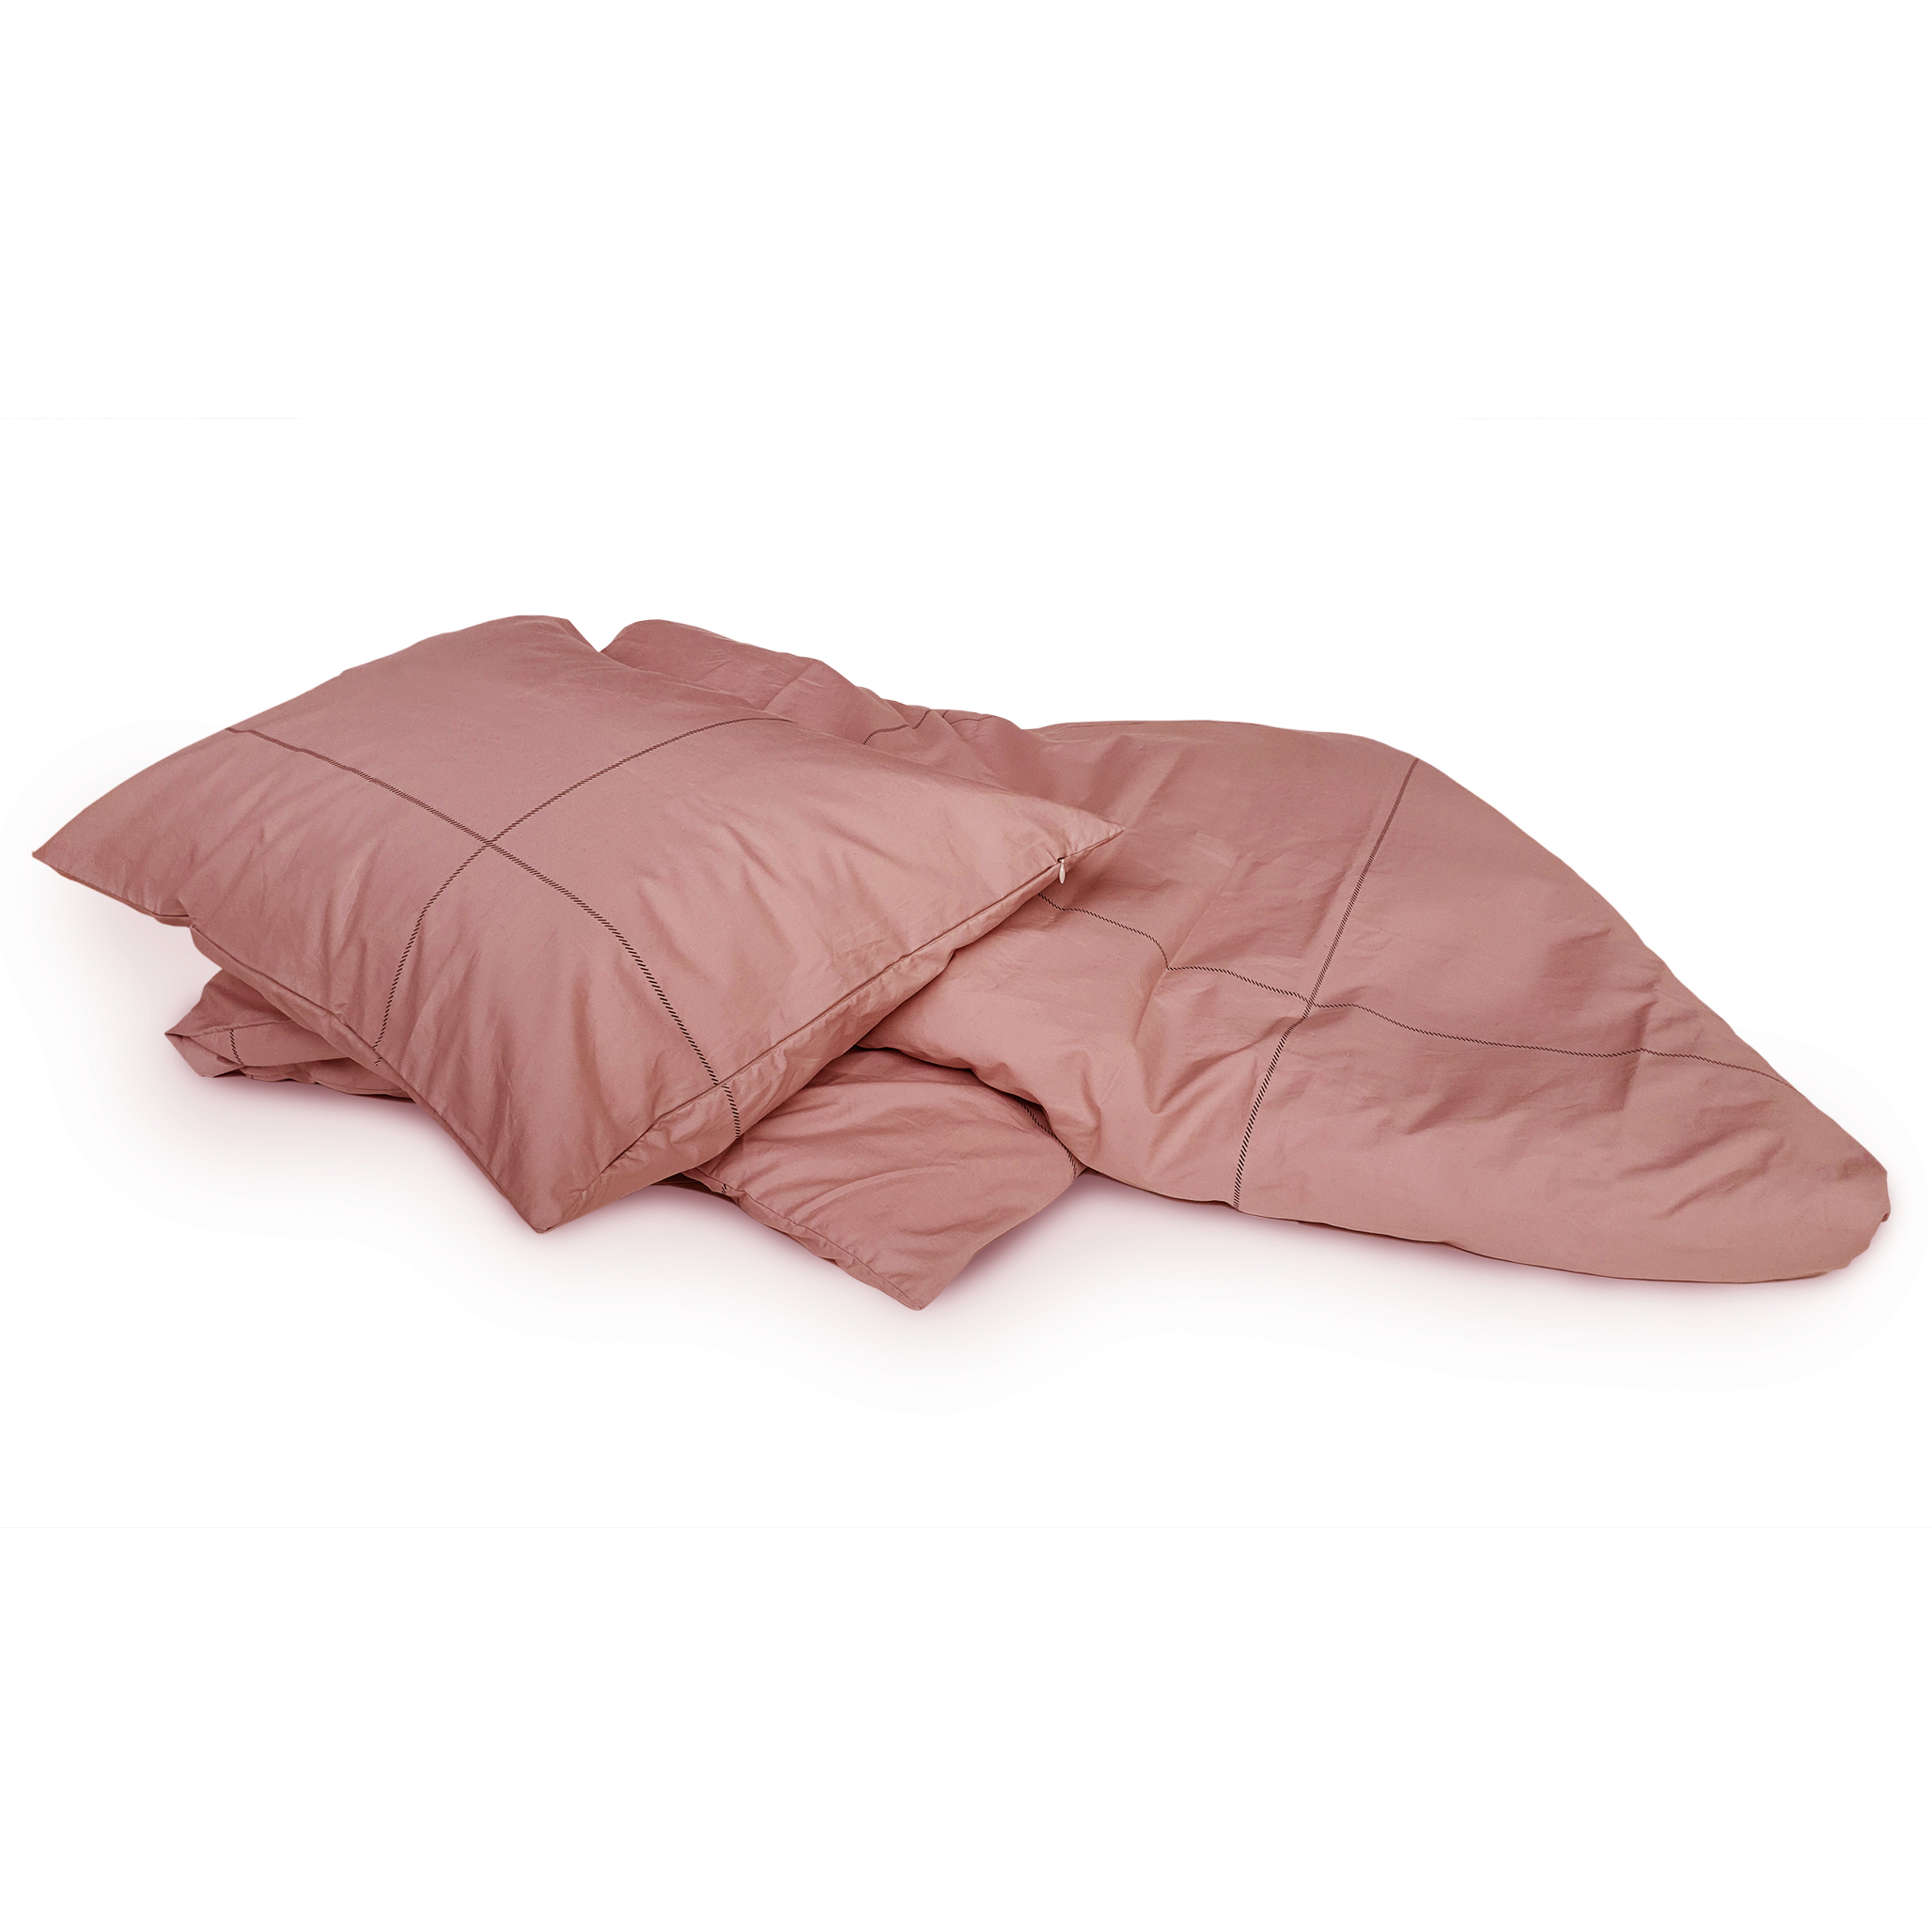 Cottage Duvet Cover Ash Pink Ihanna, Duvet Cover With Zip Fastening